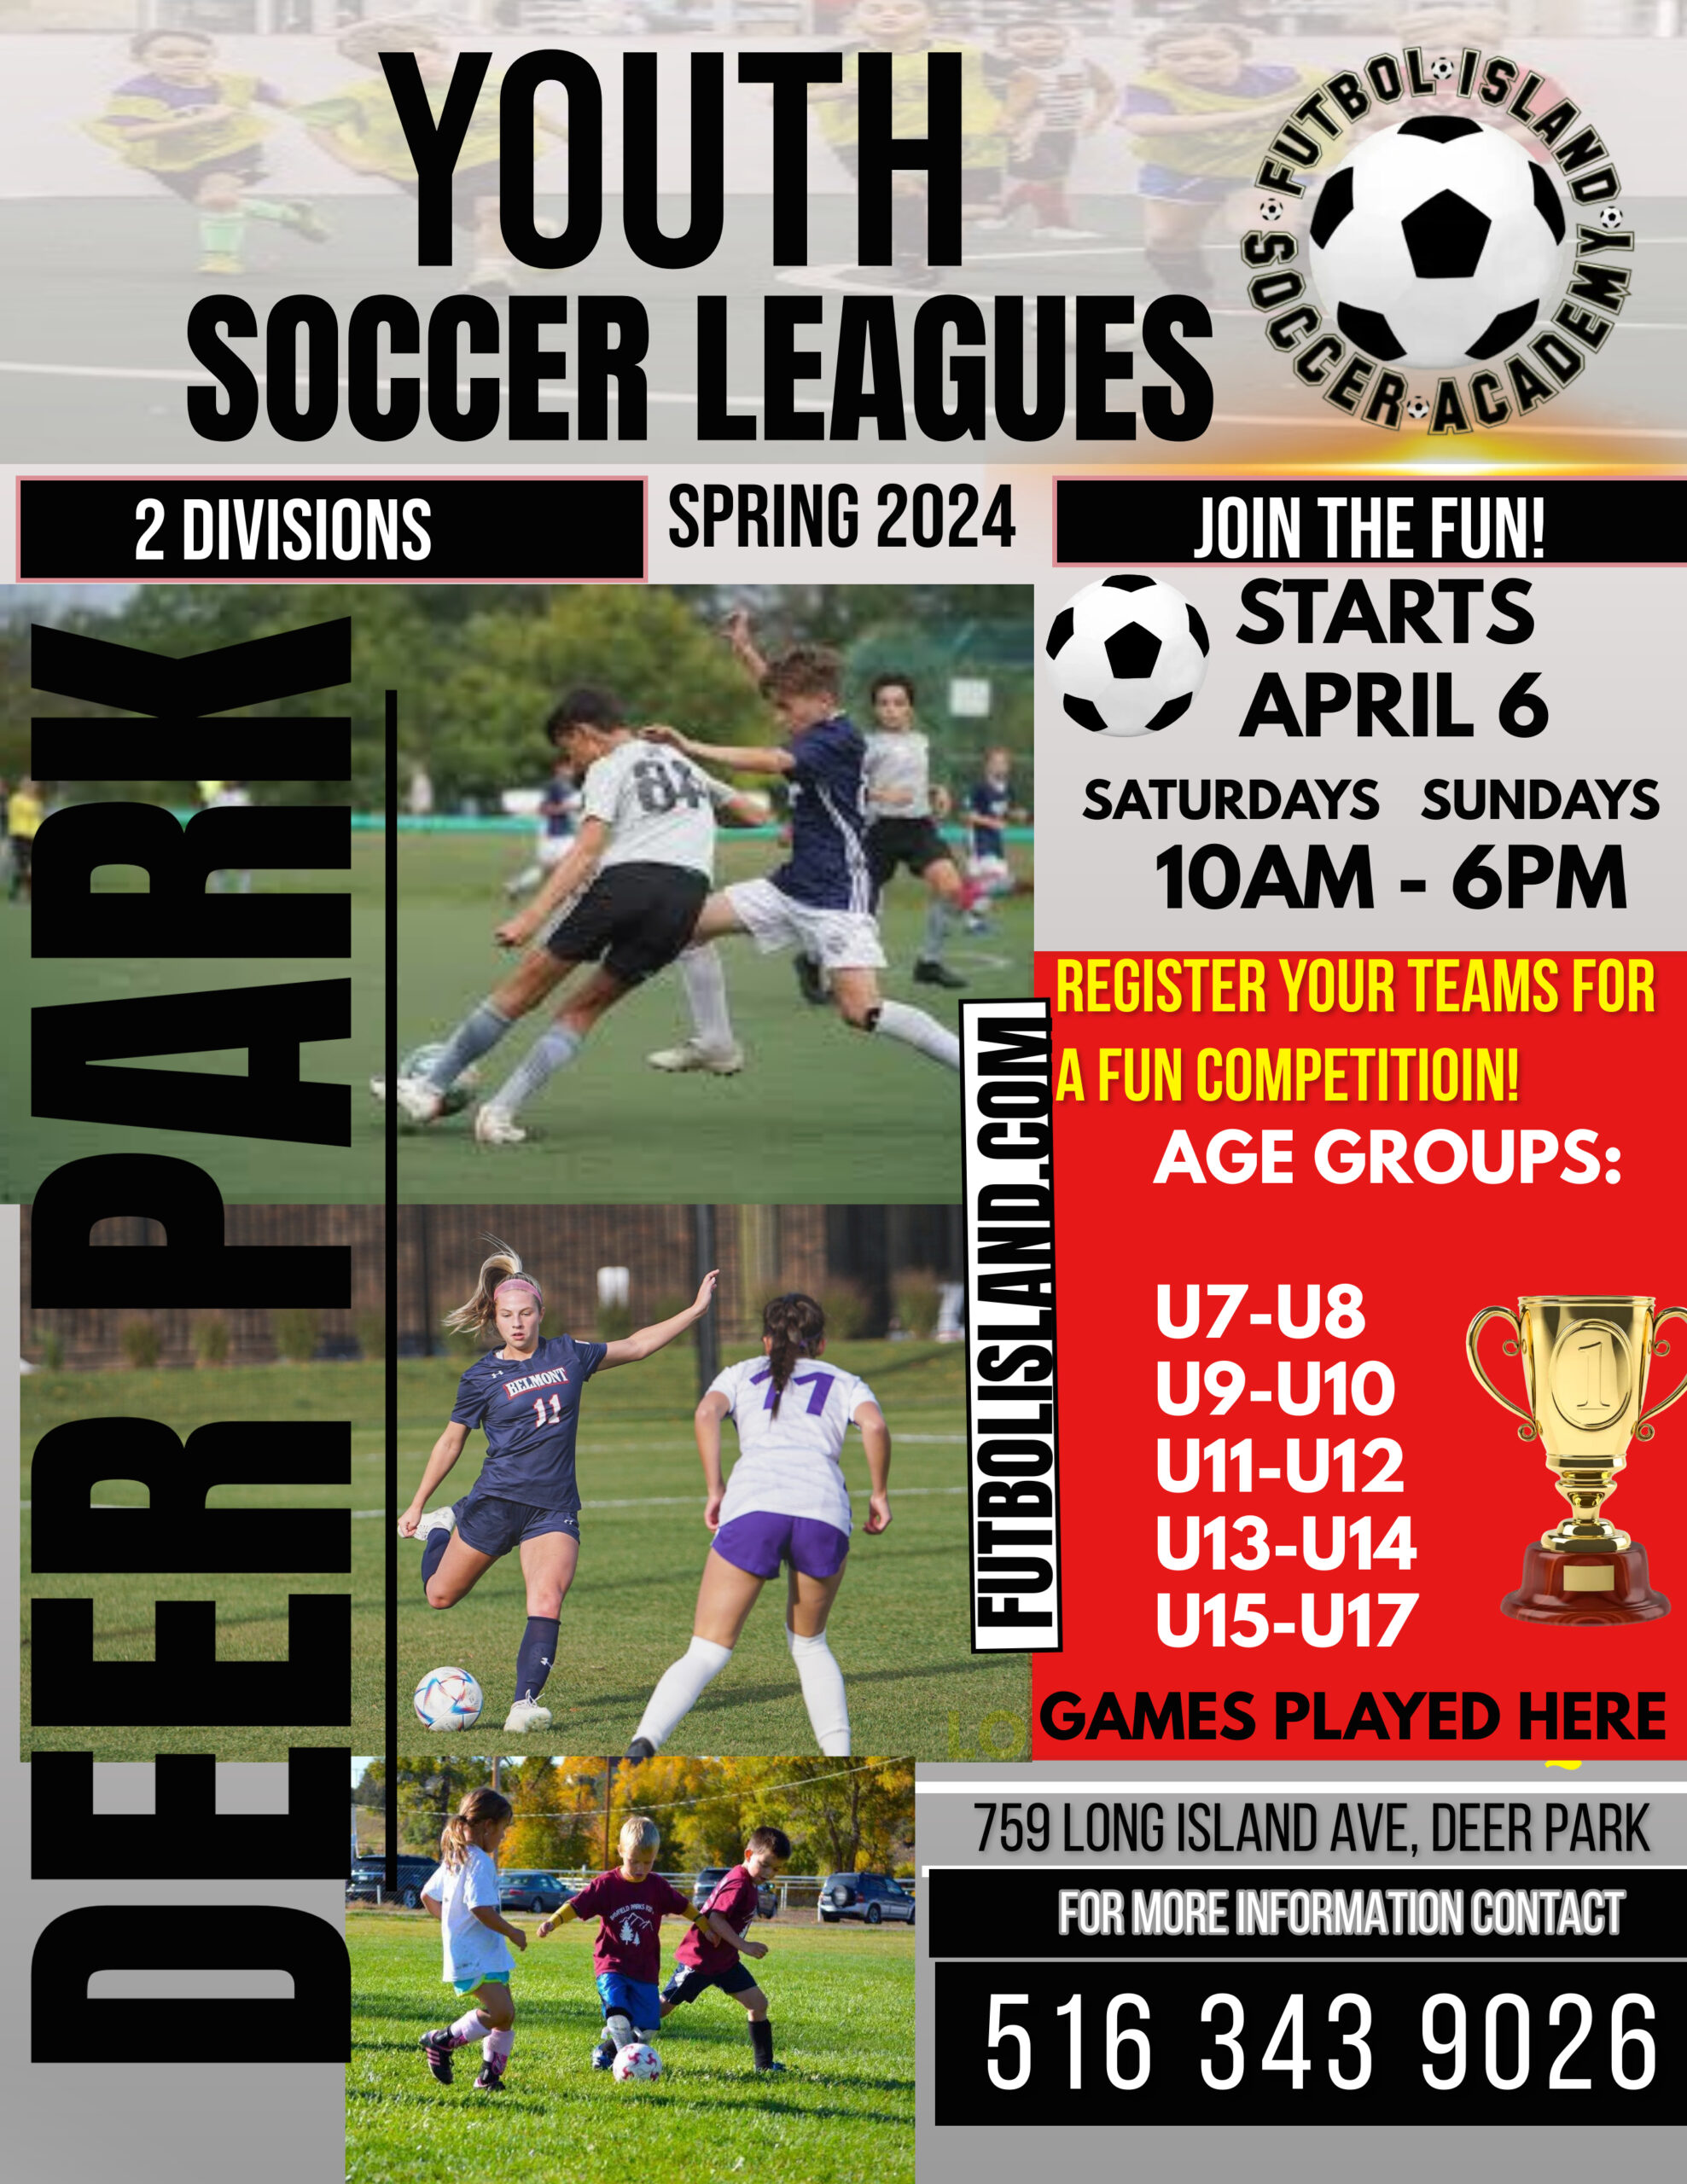 YOUTH SOCCER LEAGUES DEER PARK (1) (3)